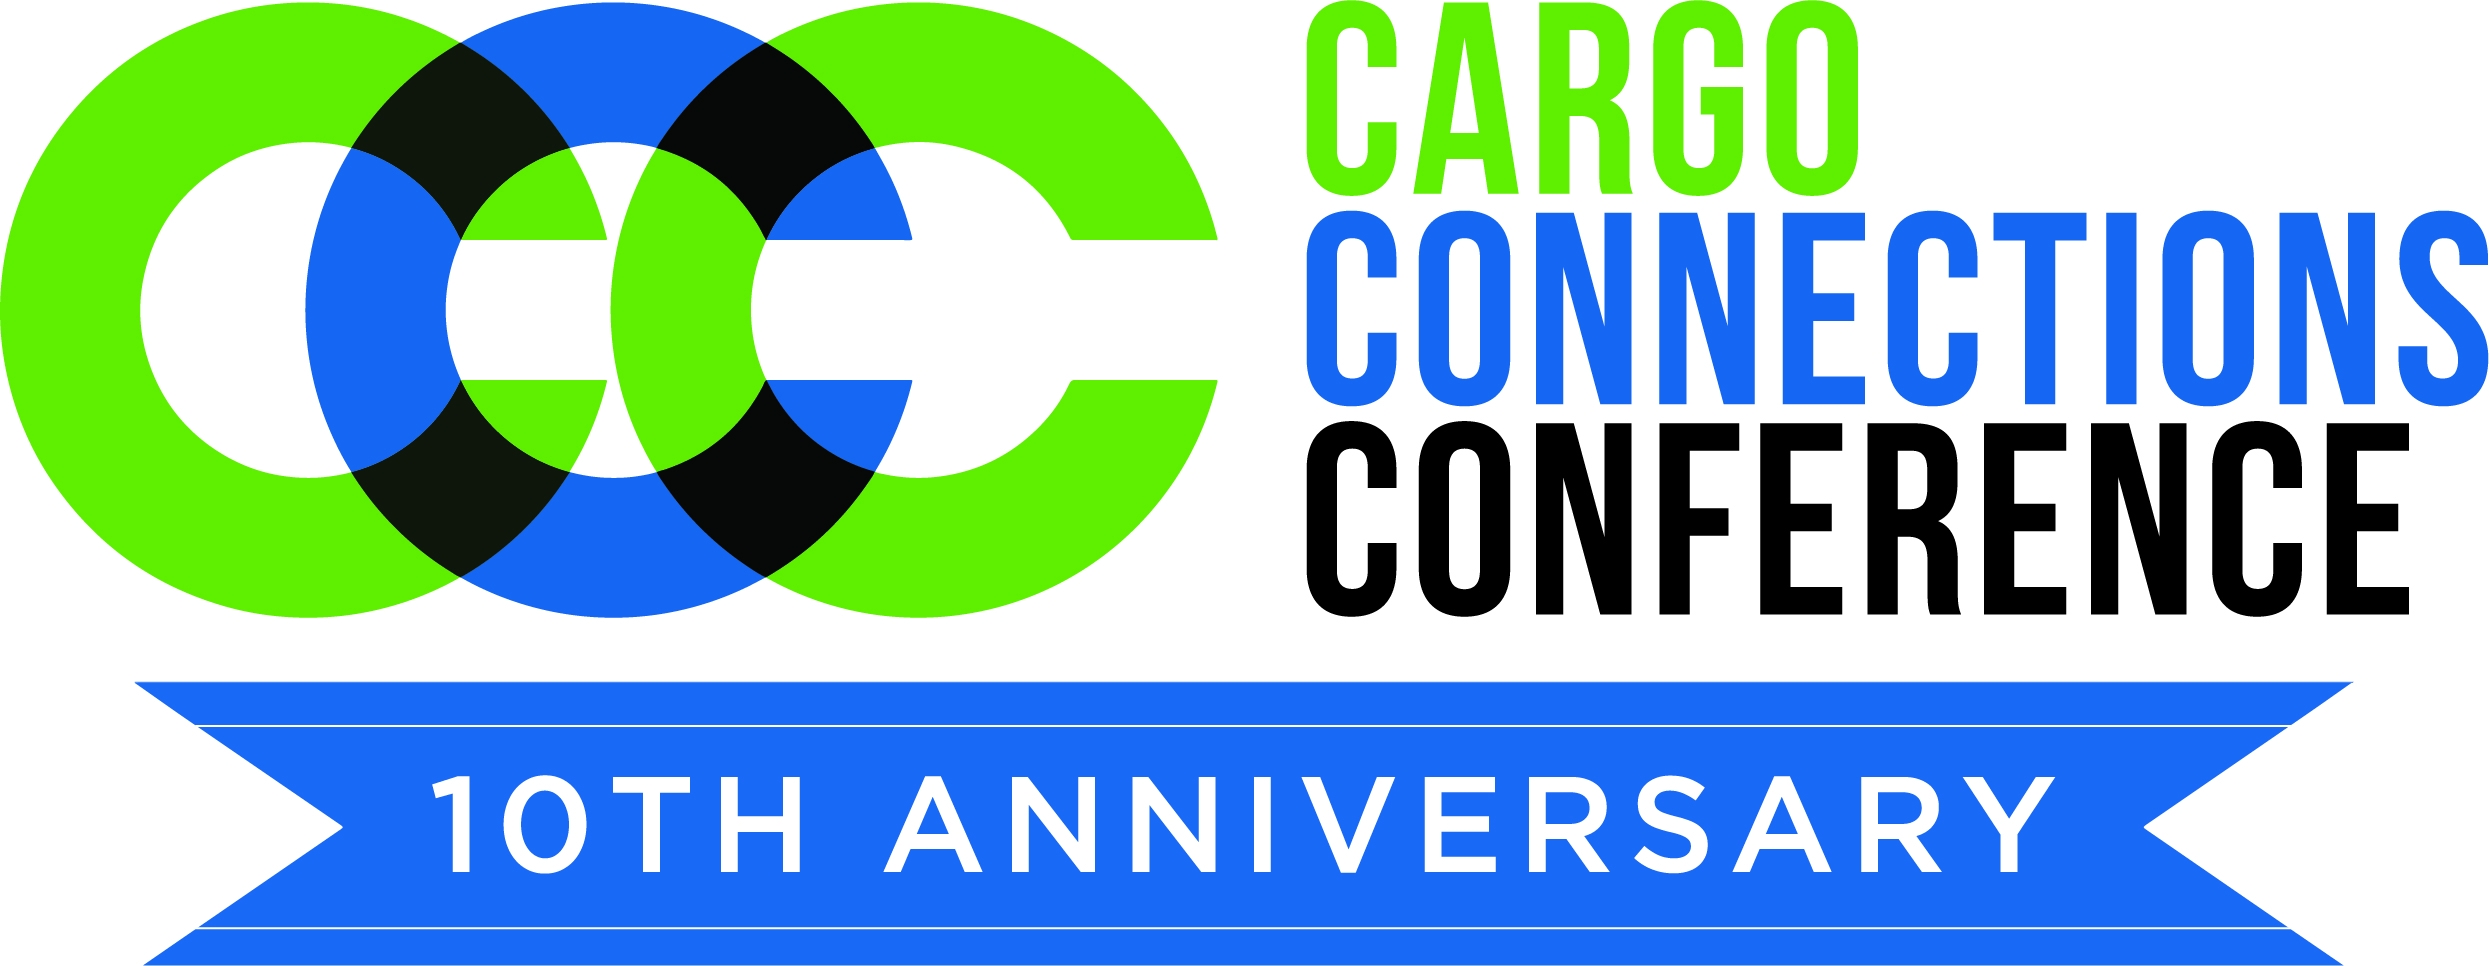 Cargo Connections Conference Logo